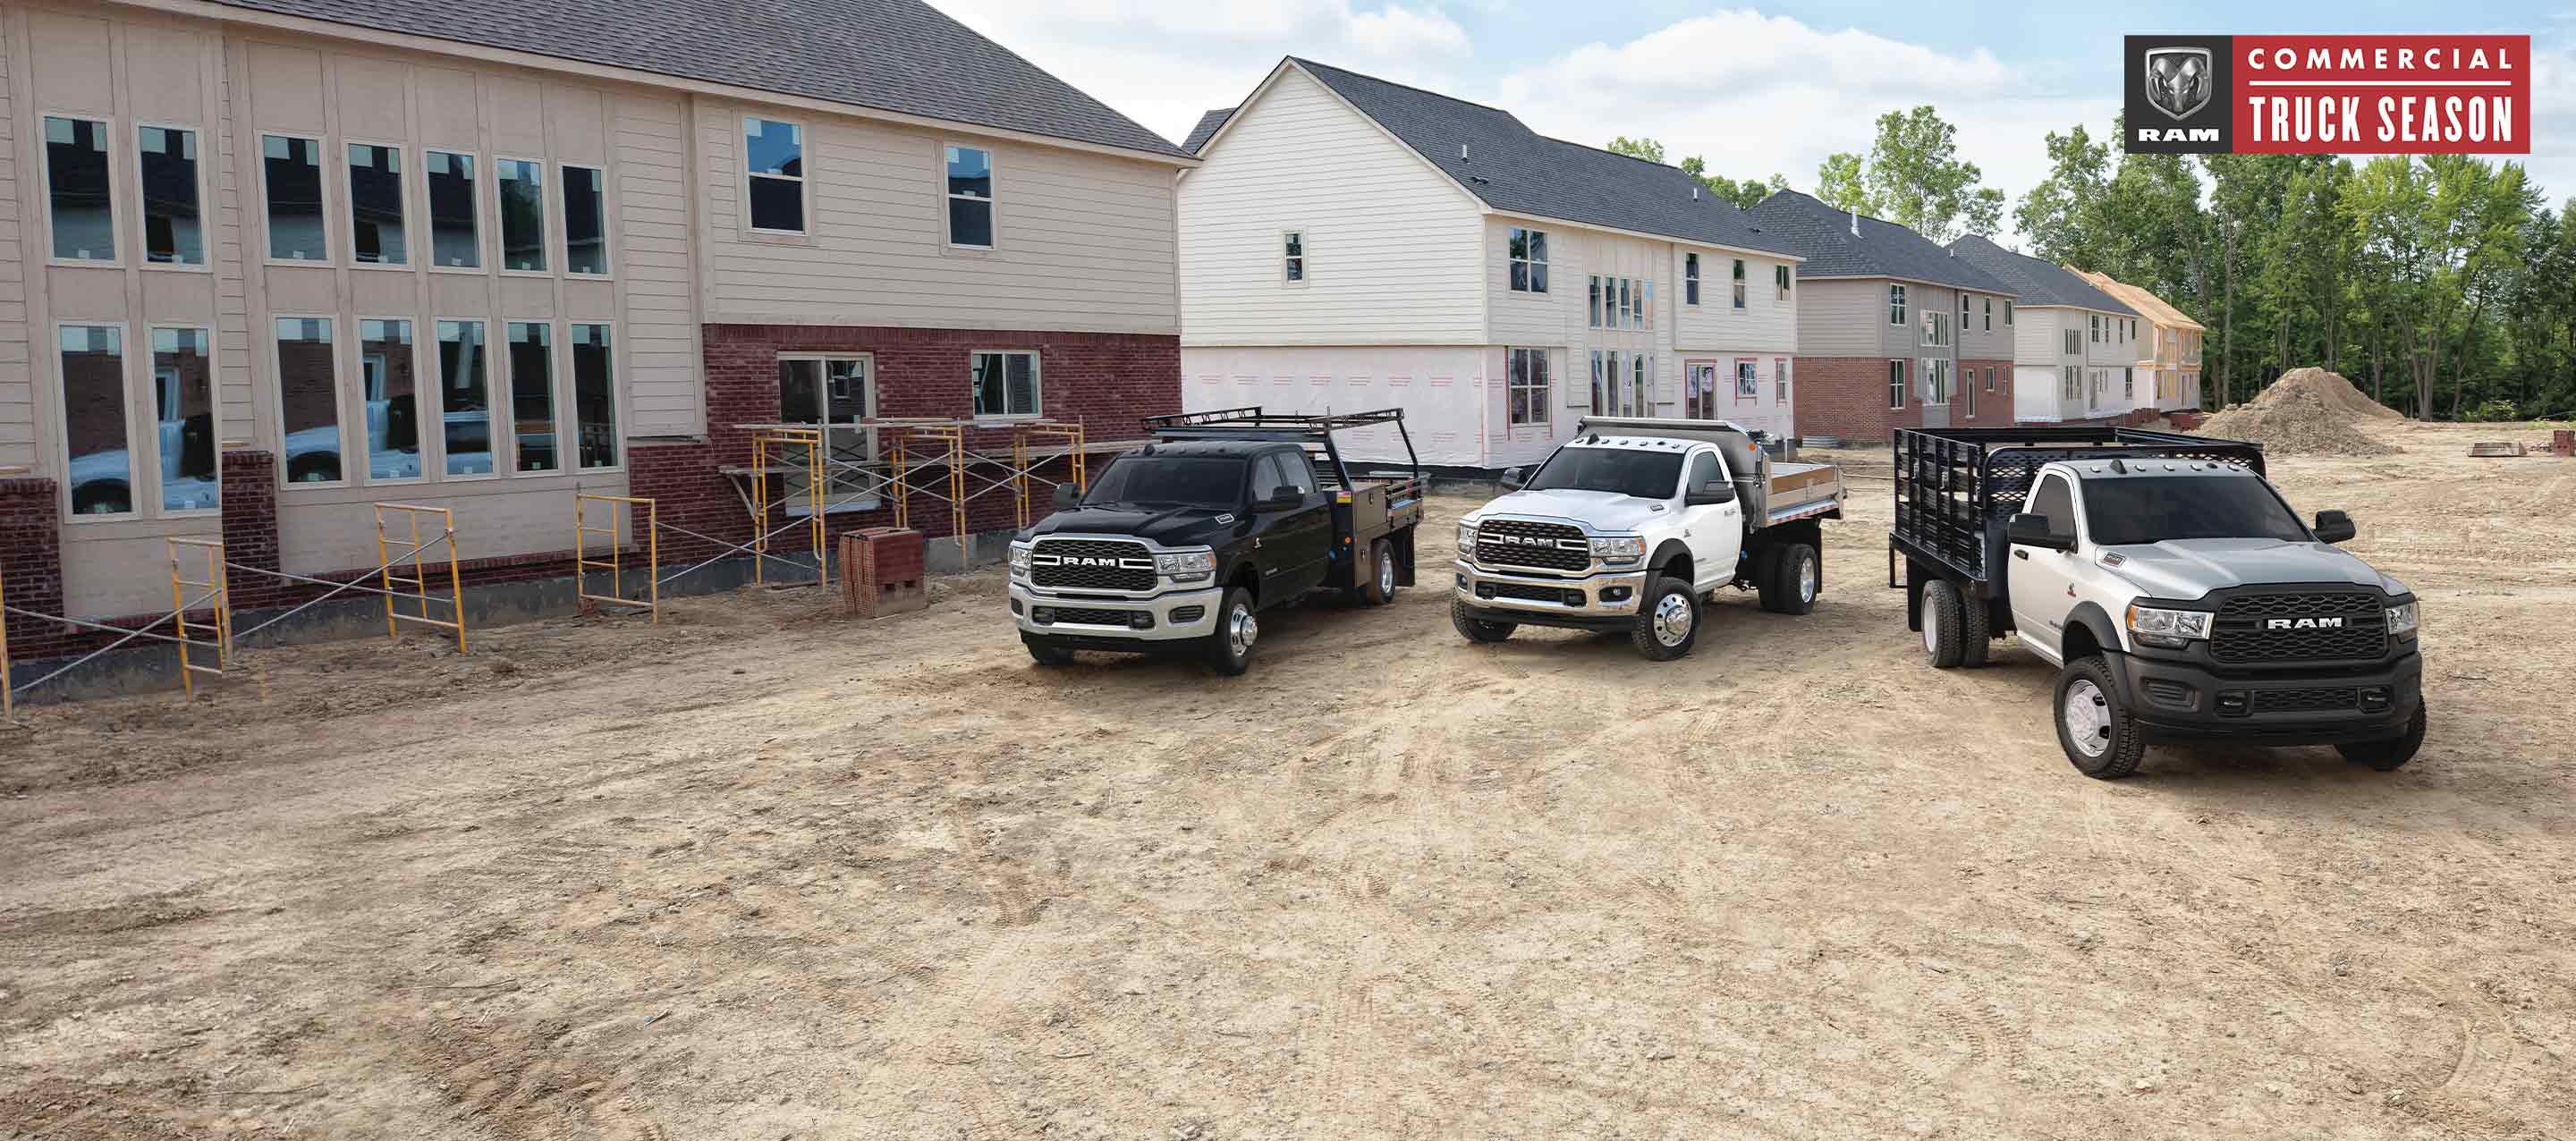 Ram Commercial. The 2022 Ram 3500 Tradesman 4x4 with Crew Cab; the 2022 Ram 5500 SLT 4x4 with Regular Cab and the 2022 Ram 4500 Tradesman 4x4 with Regular Cab parked on a construction site.